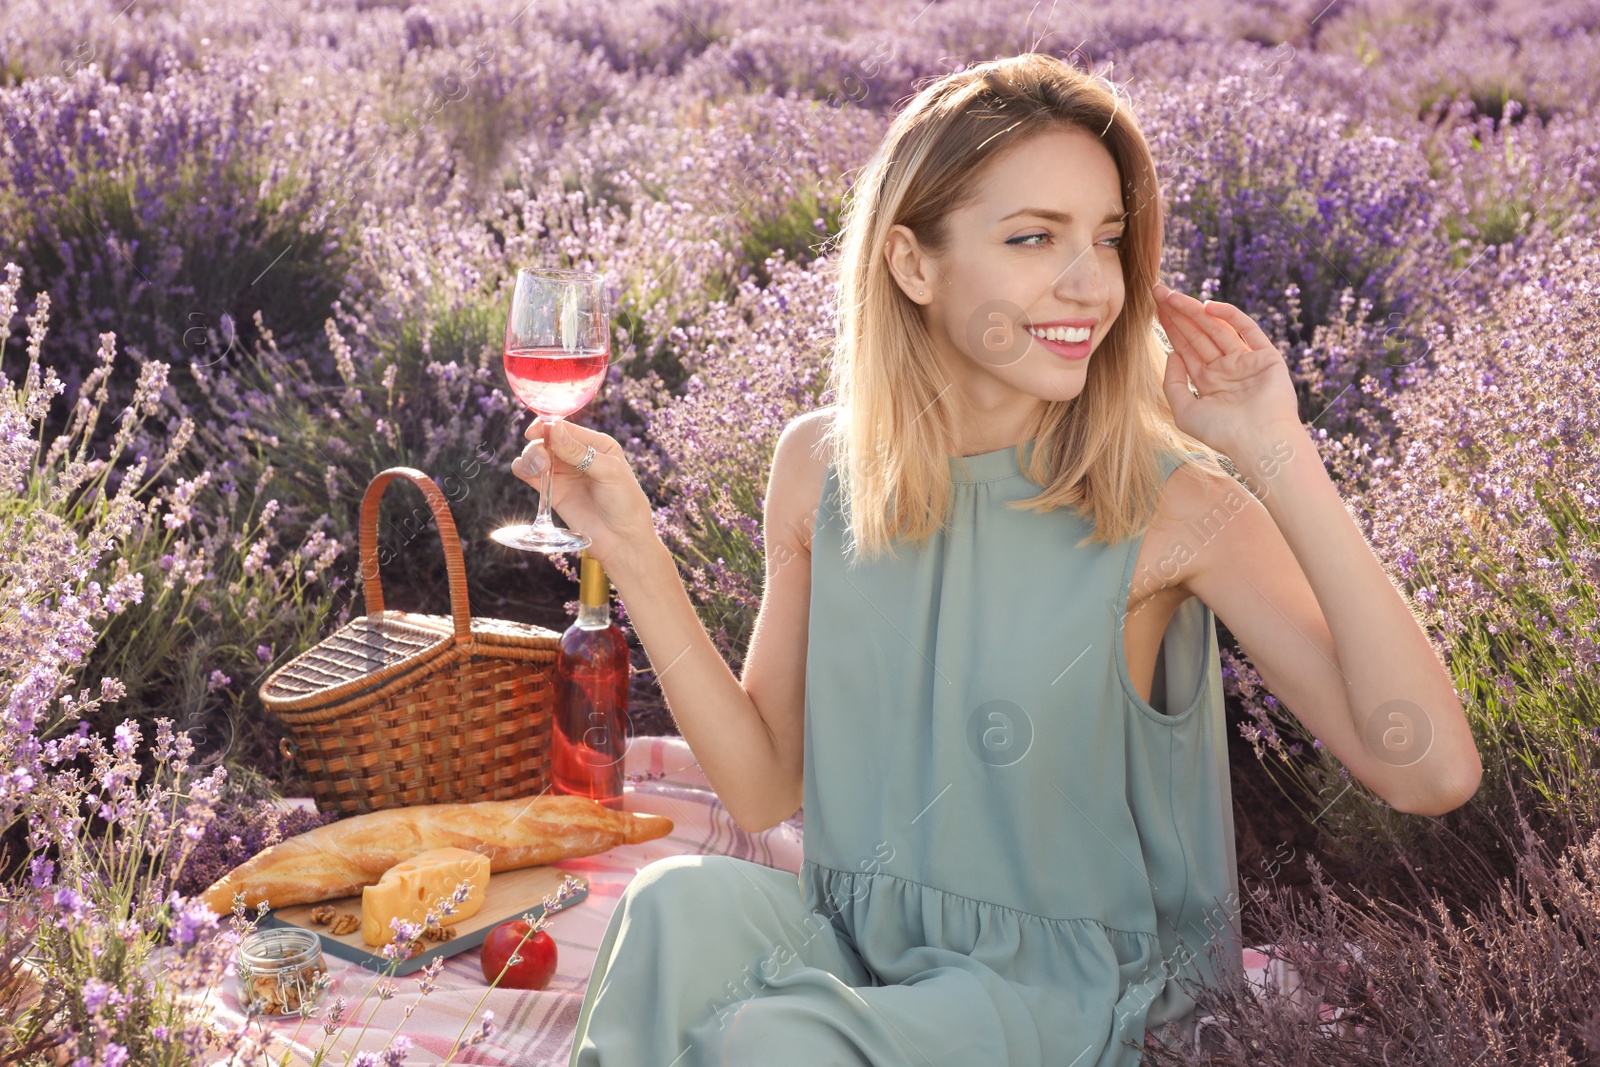 Photo of Young woman having picnic in lavender field